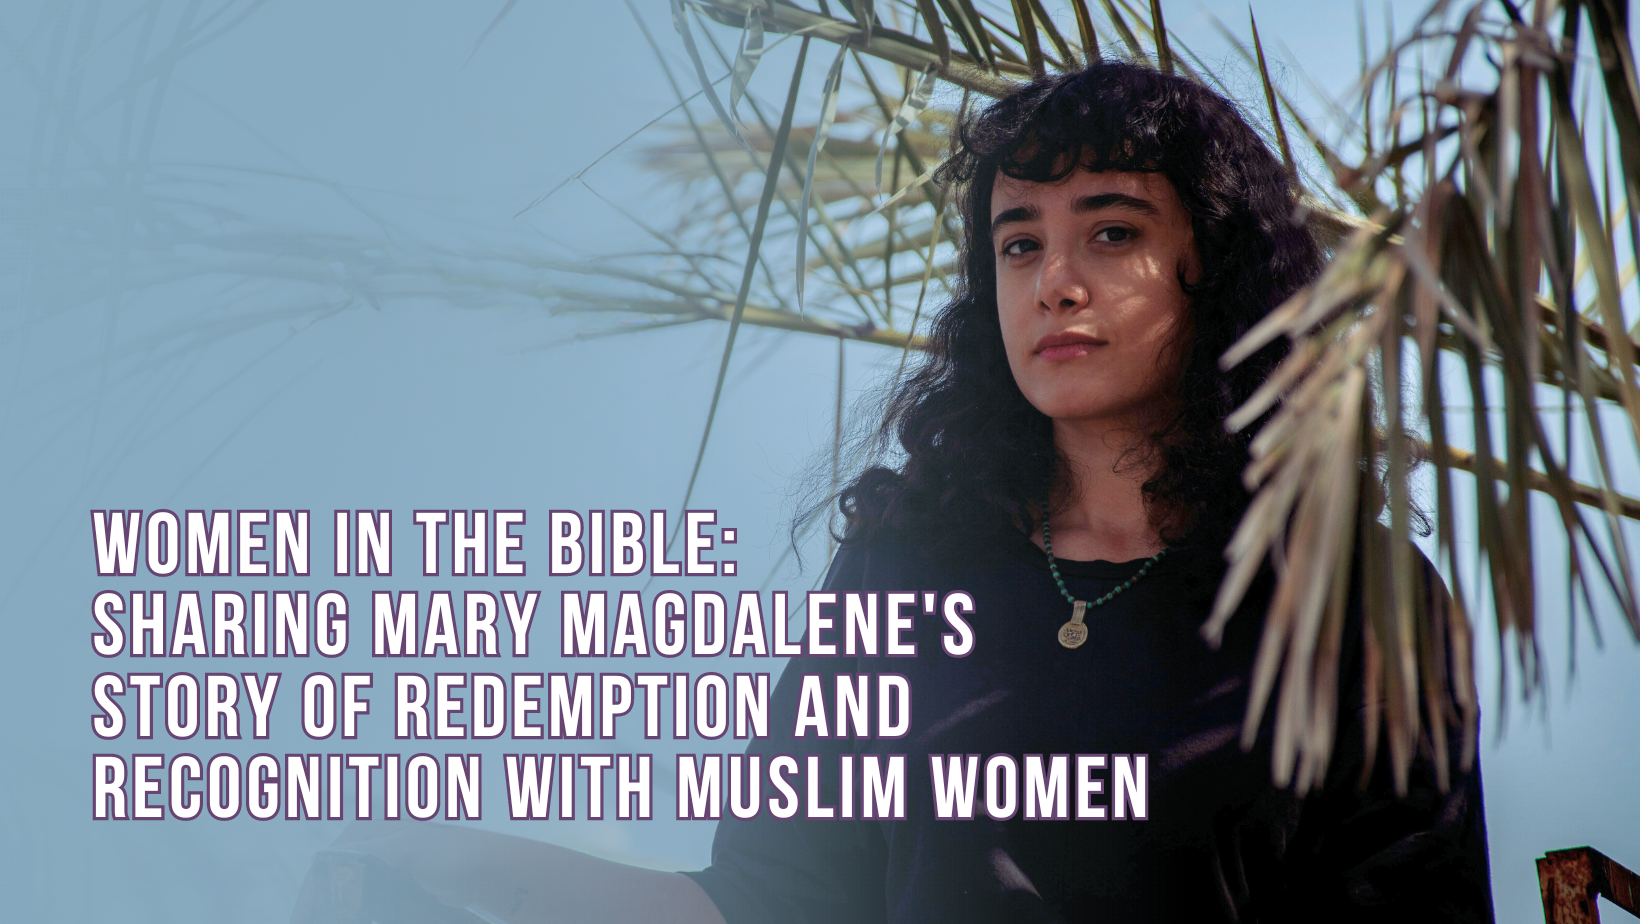 Women in the Bible: Sharing Mary Magdalene's story of redemption and recognition with Muslim women